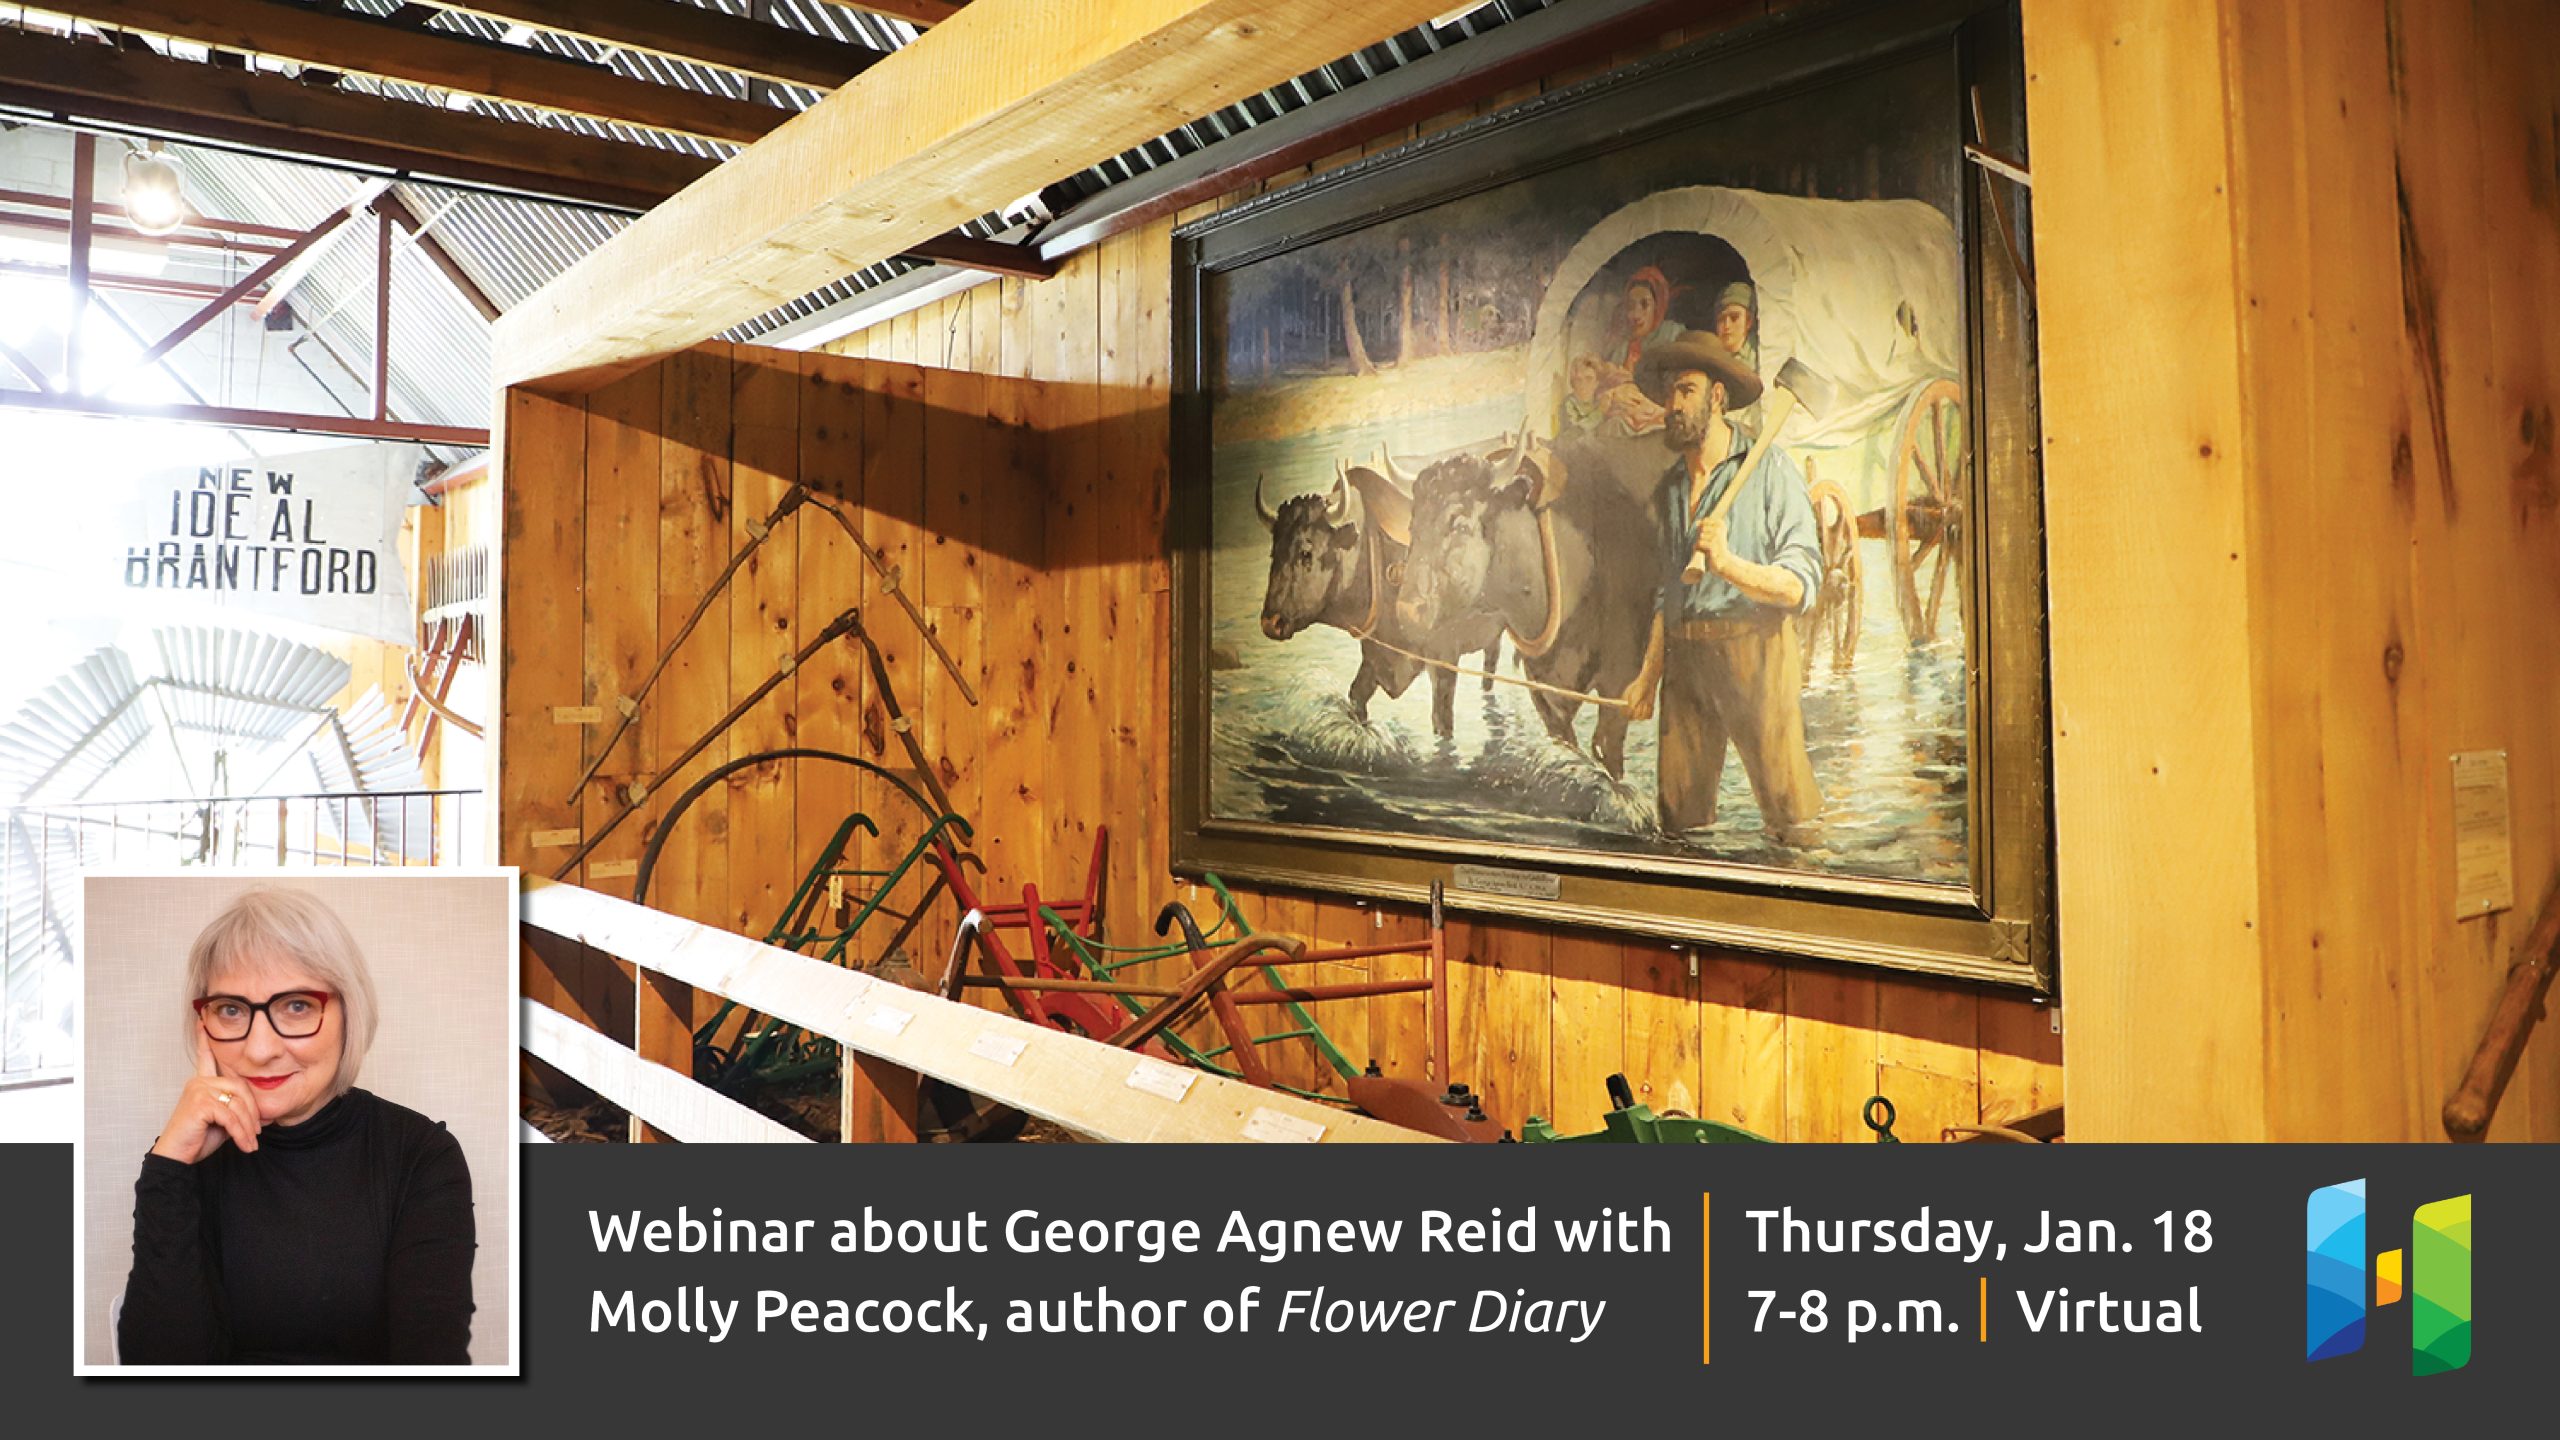 Image of Molly Peacock and George Agnew Reid painting at the Museum with text promoting virtual event